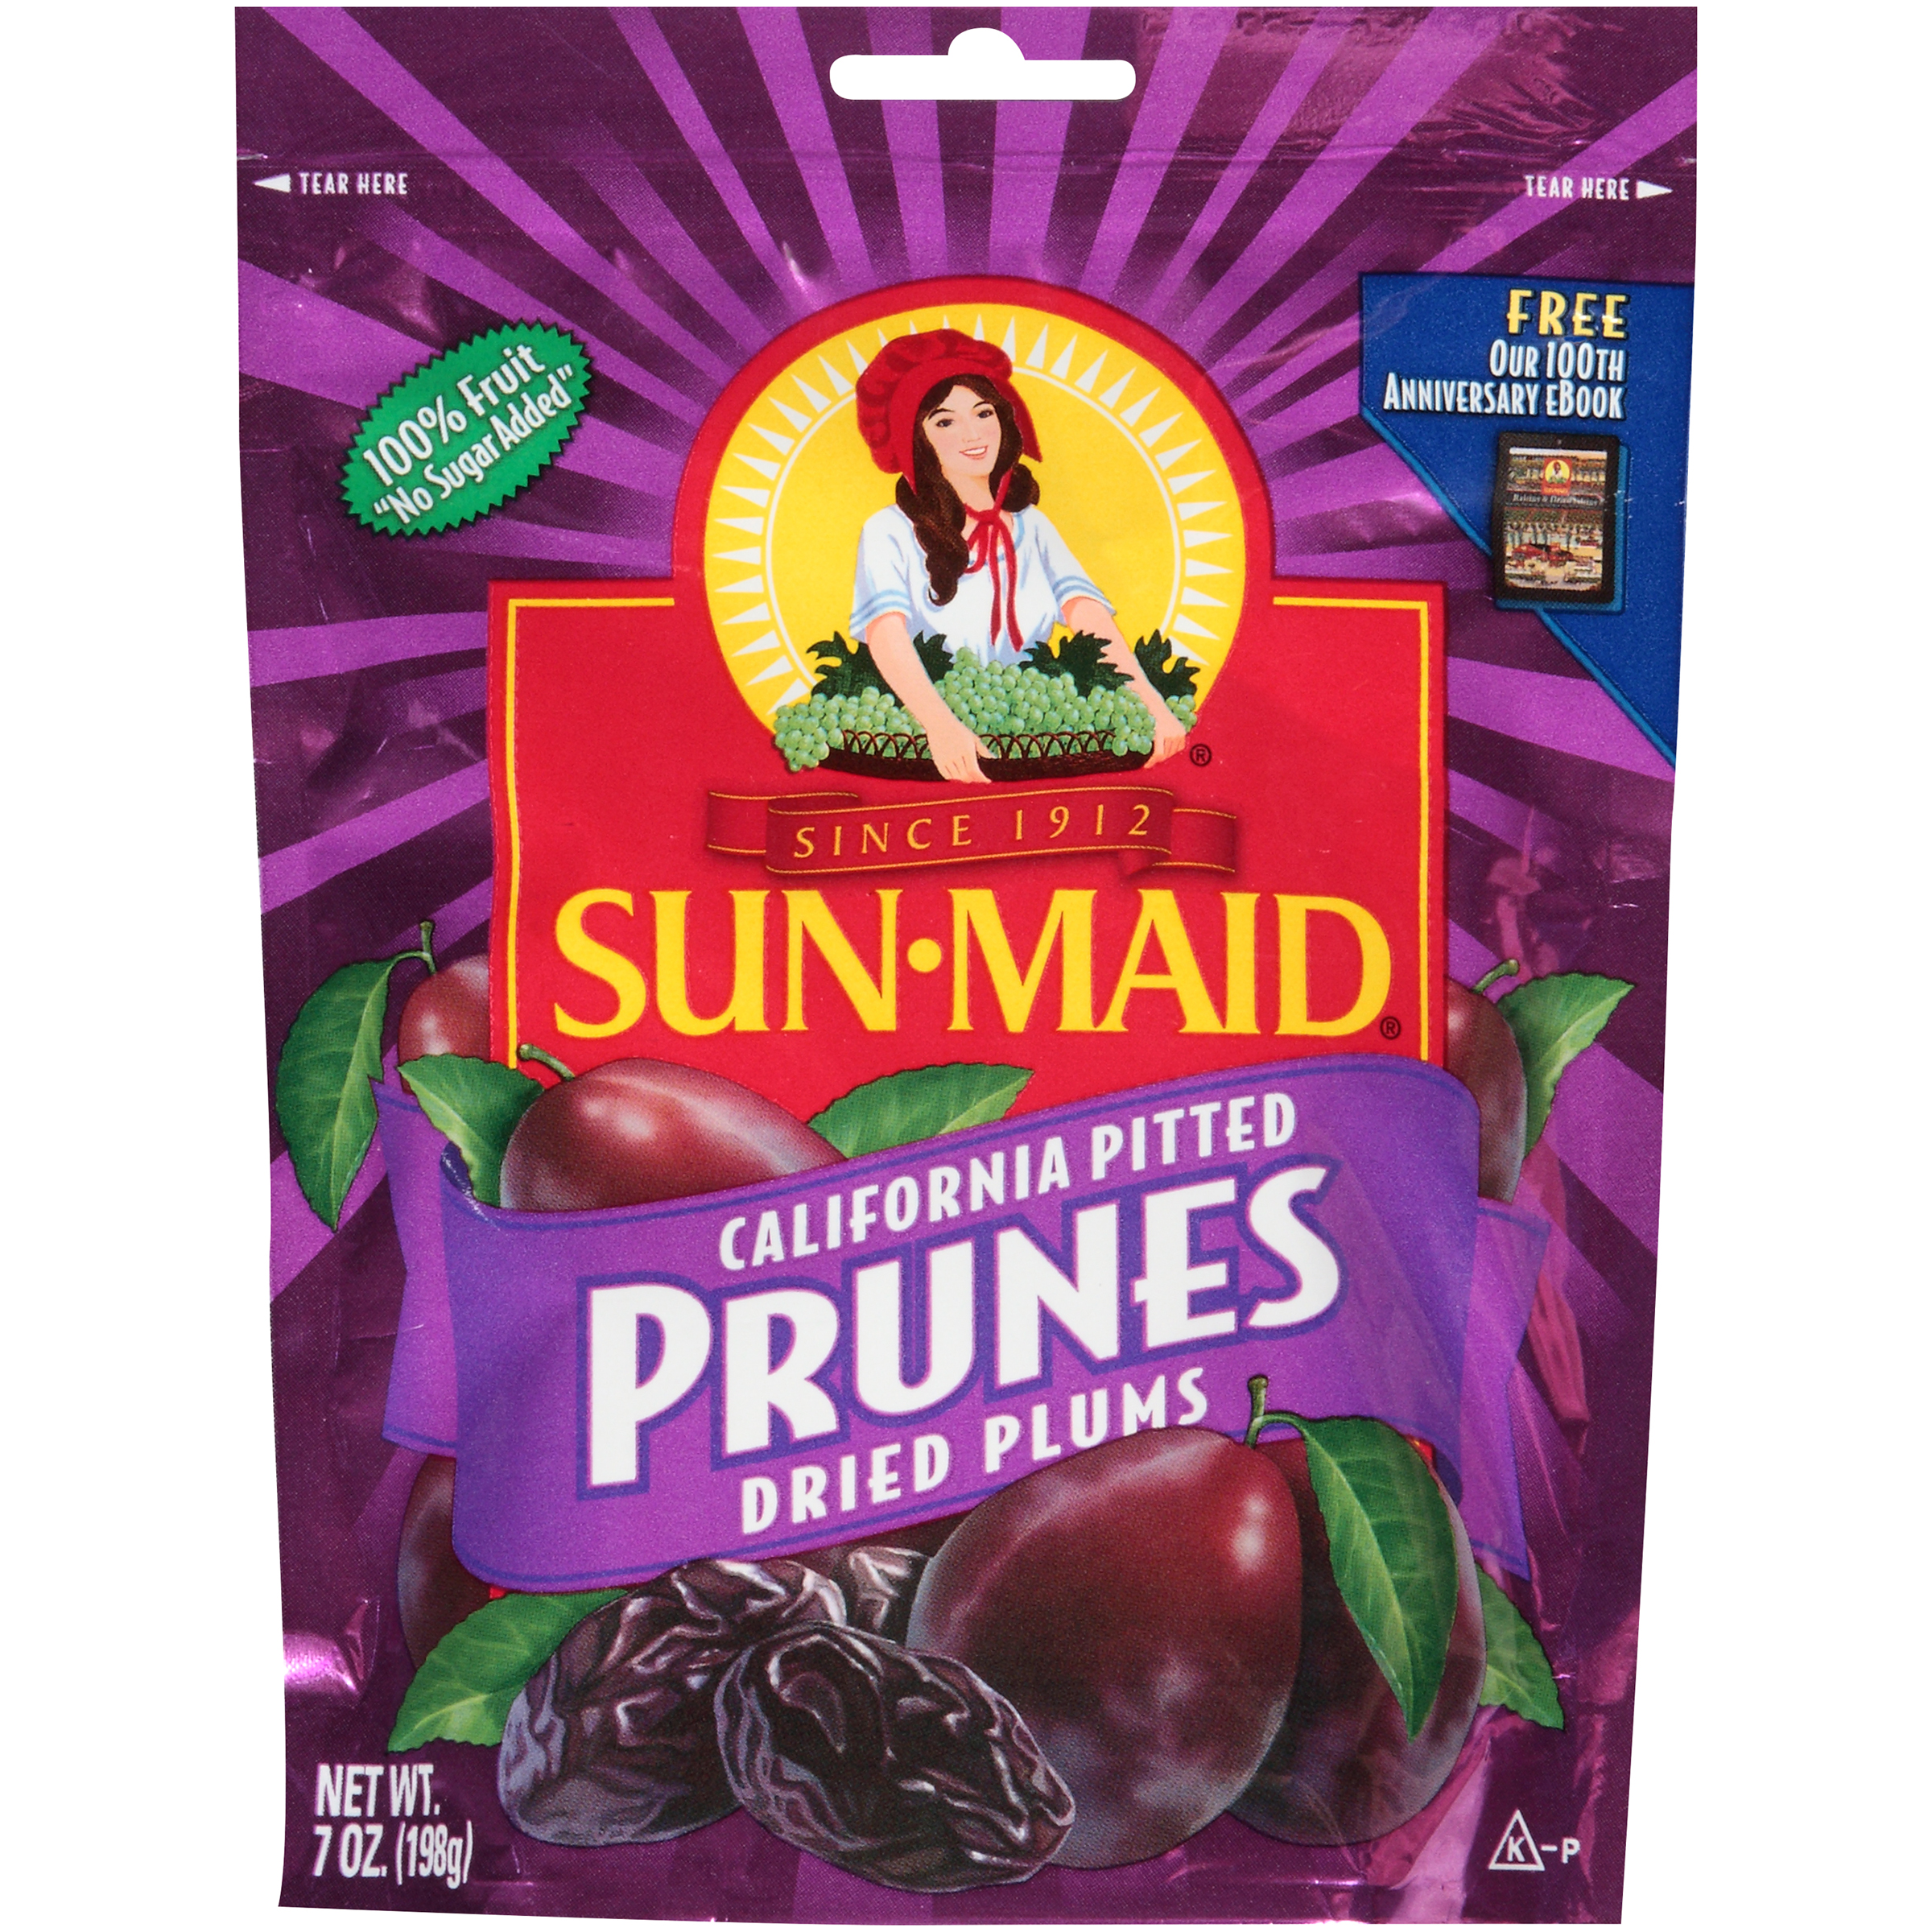 Sun-Maid Pitted Prunes Dried Plums Net Wt 7 oz (198 g)